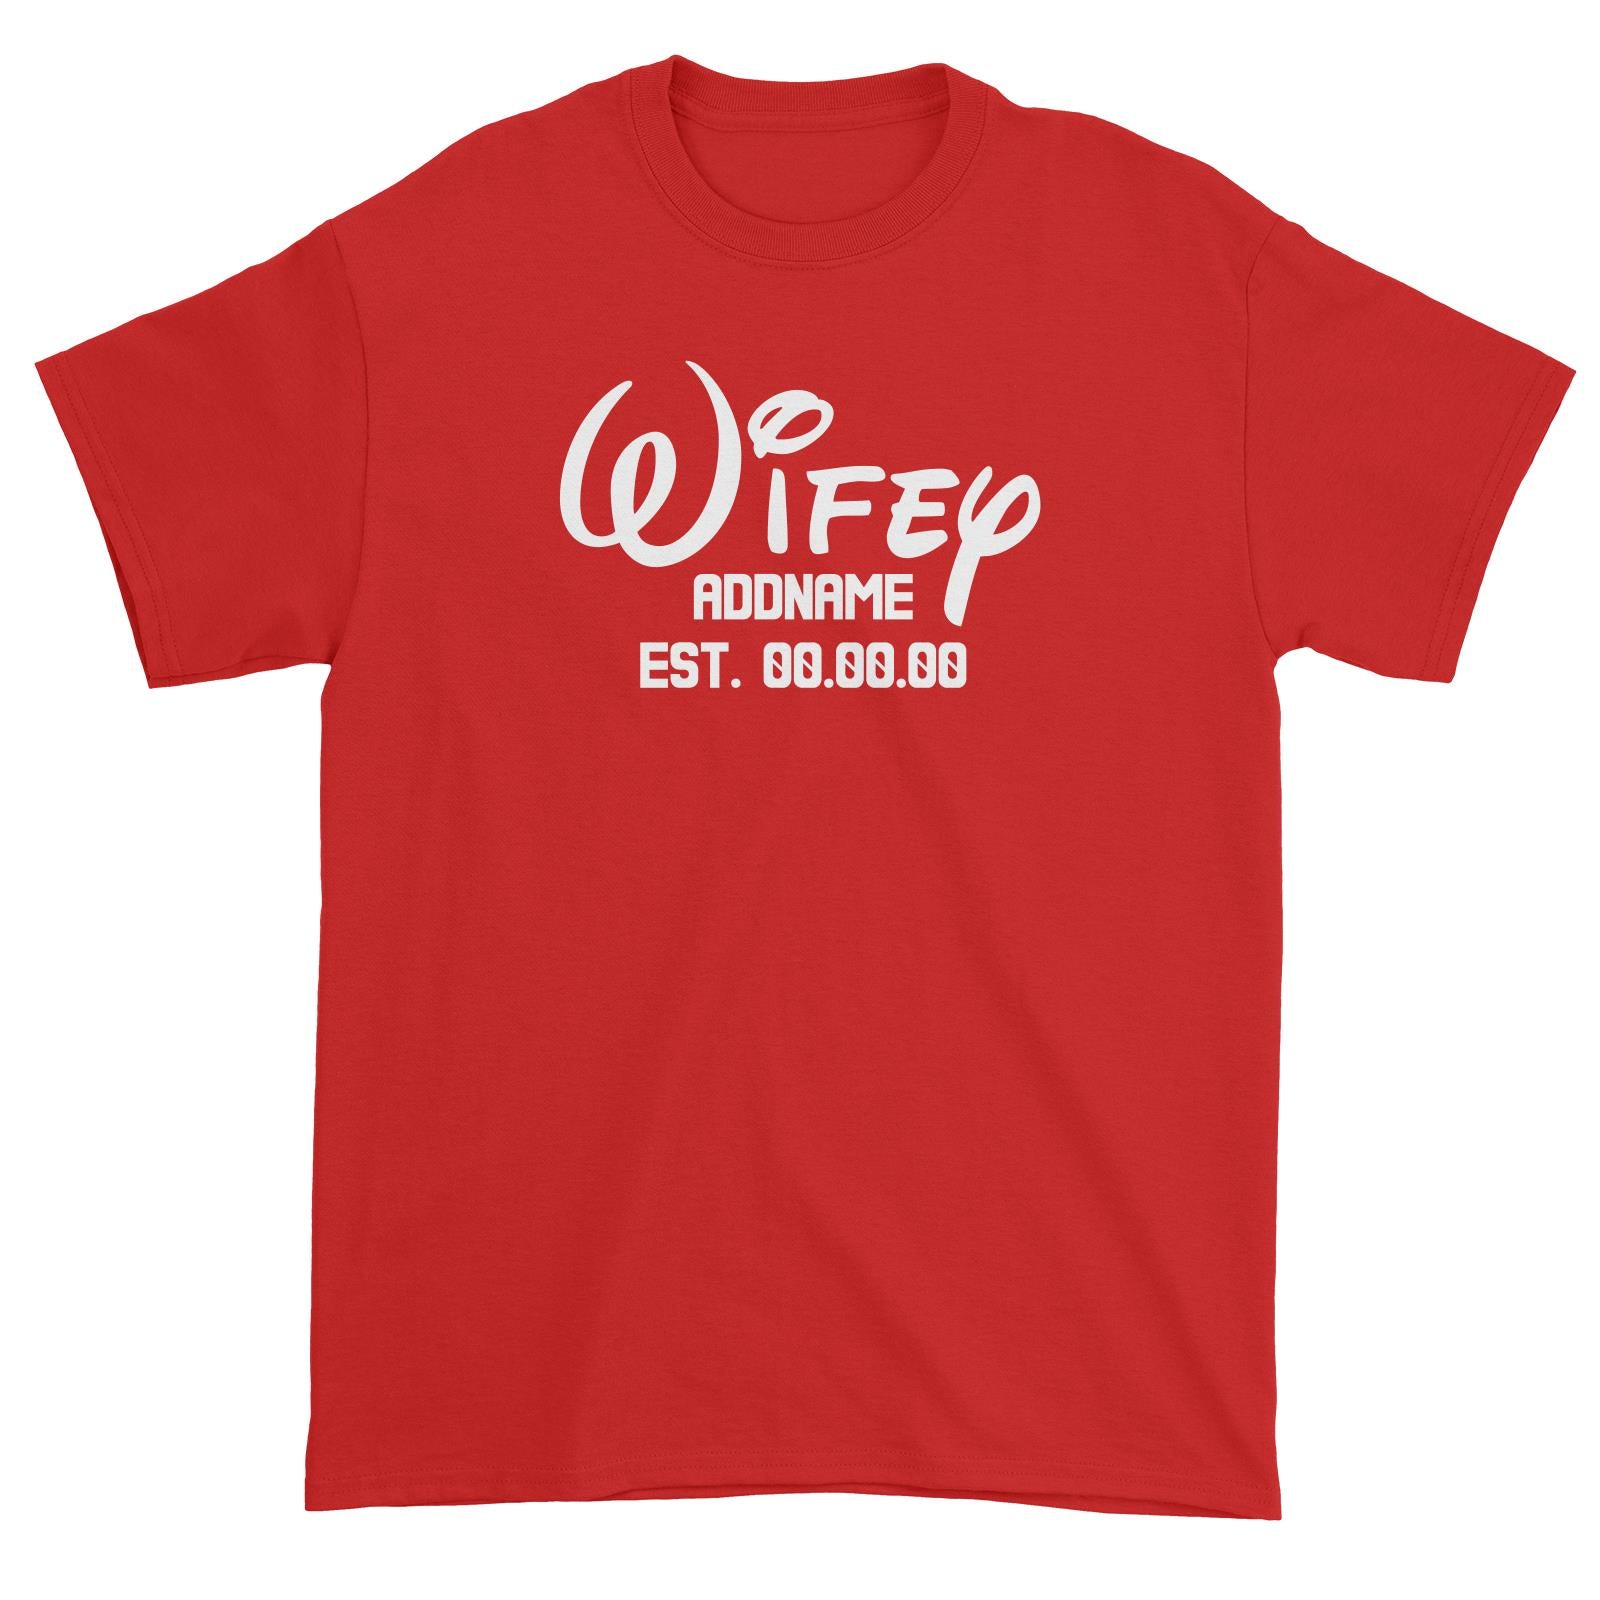 Husband and Wife Wifey Addname With Date Unisex T-Shirt